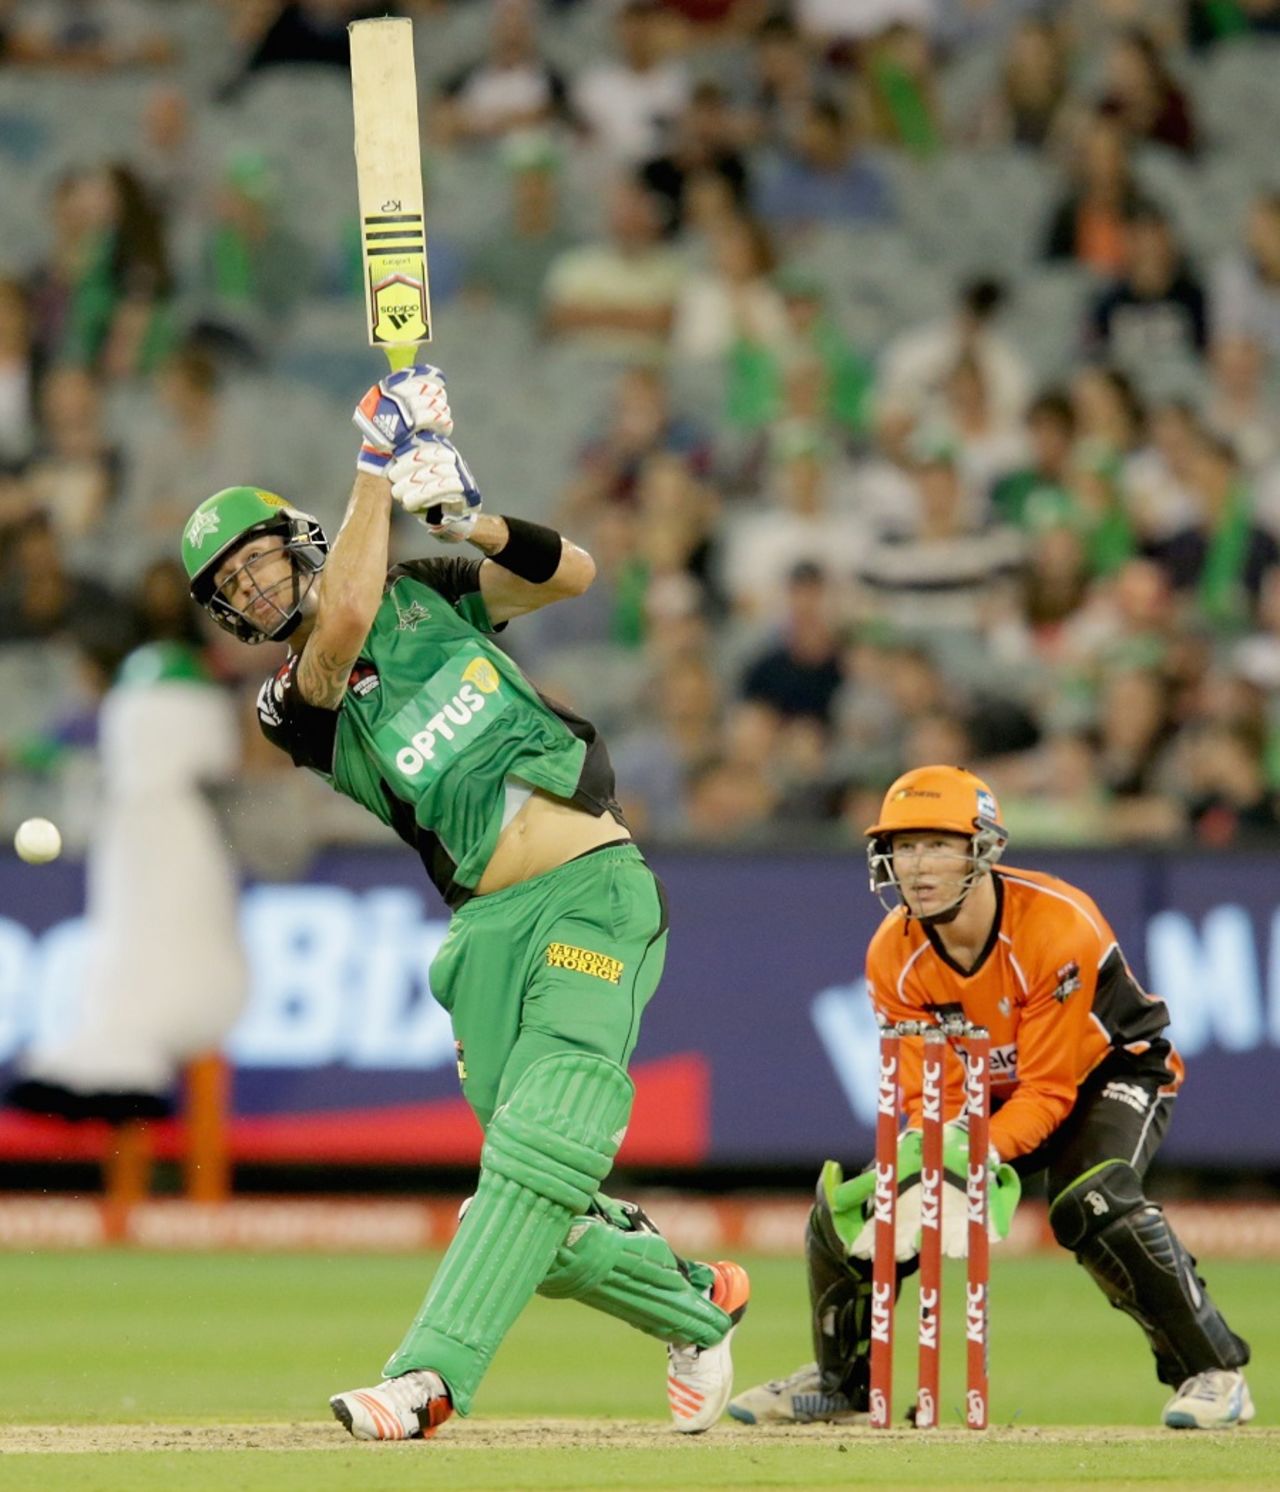 Kevin Pietersen hits down the ground, Melbourne Stars v Perth Scorchers, 2nd semi-final, BBL 2015-16, Melbourne, January 22, 2016